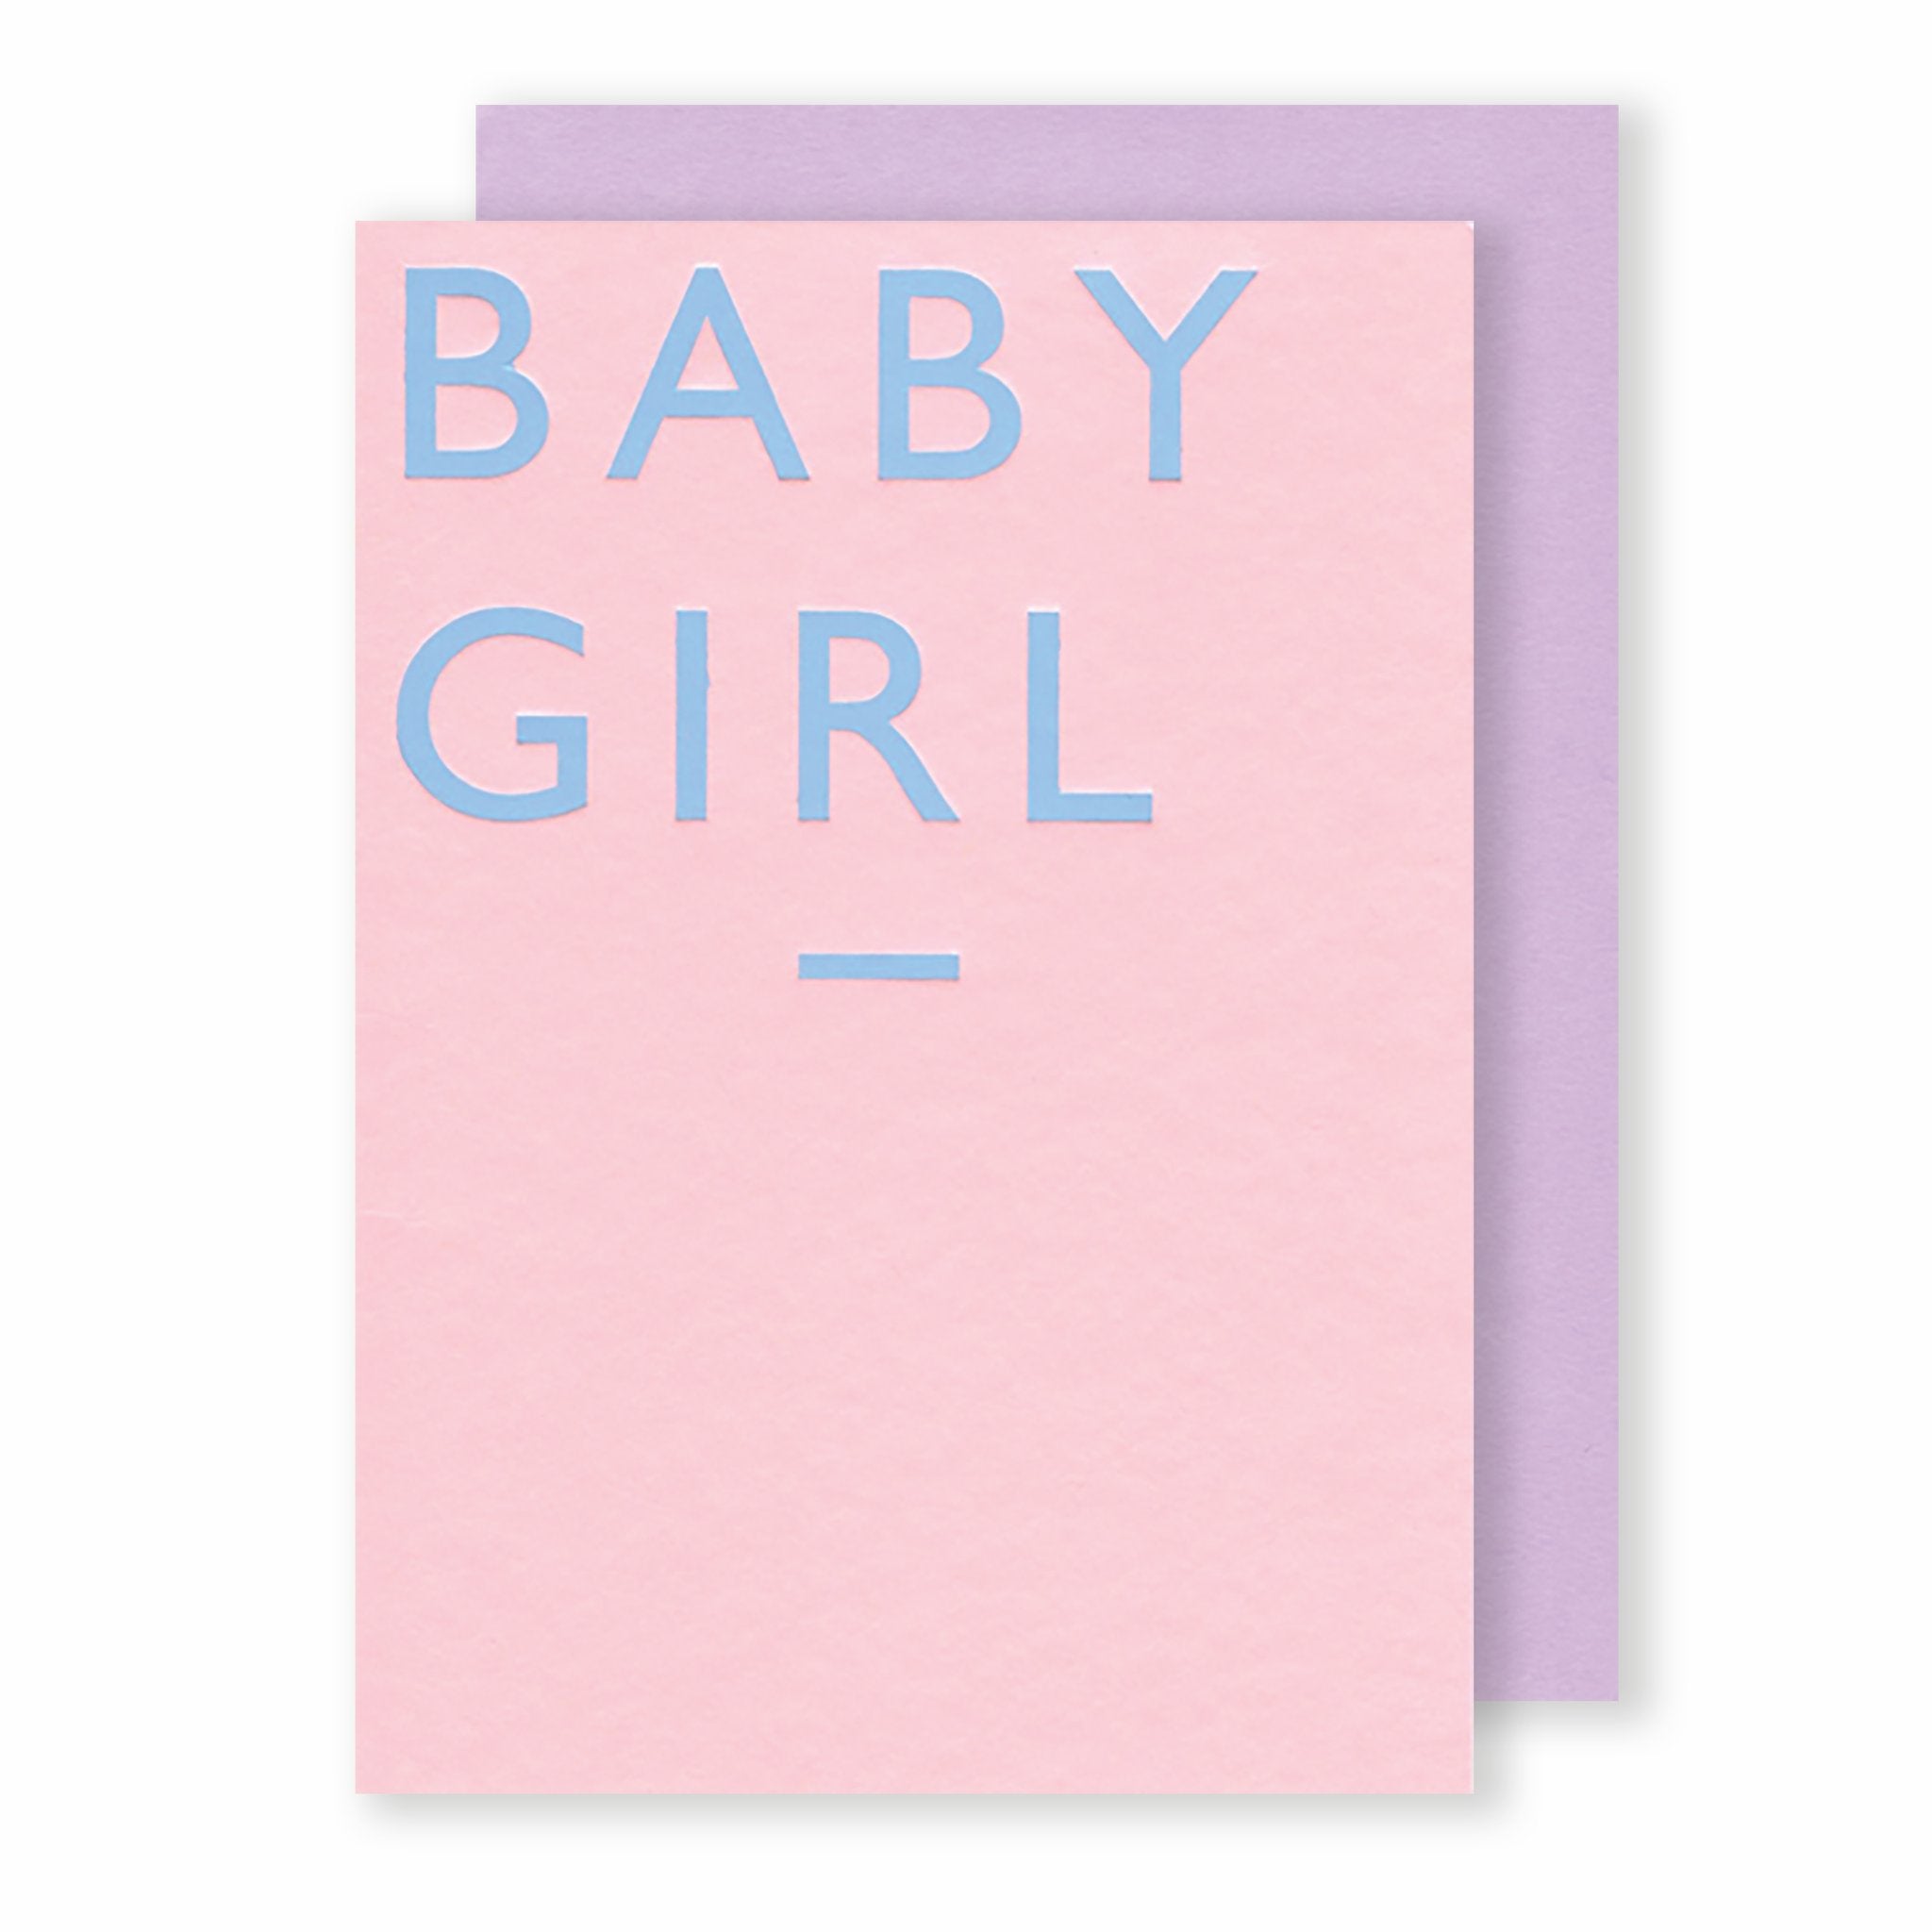 'Baby Girl' - Card - Five And Dime